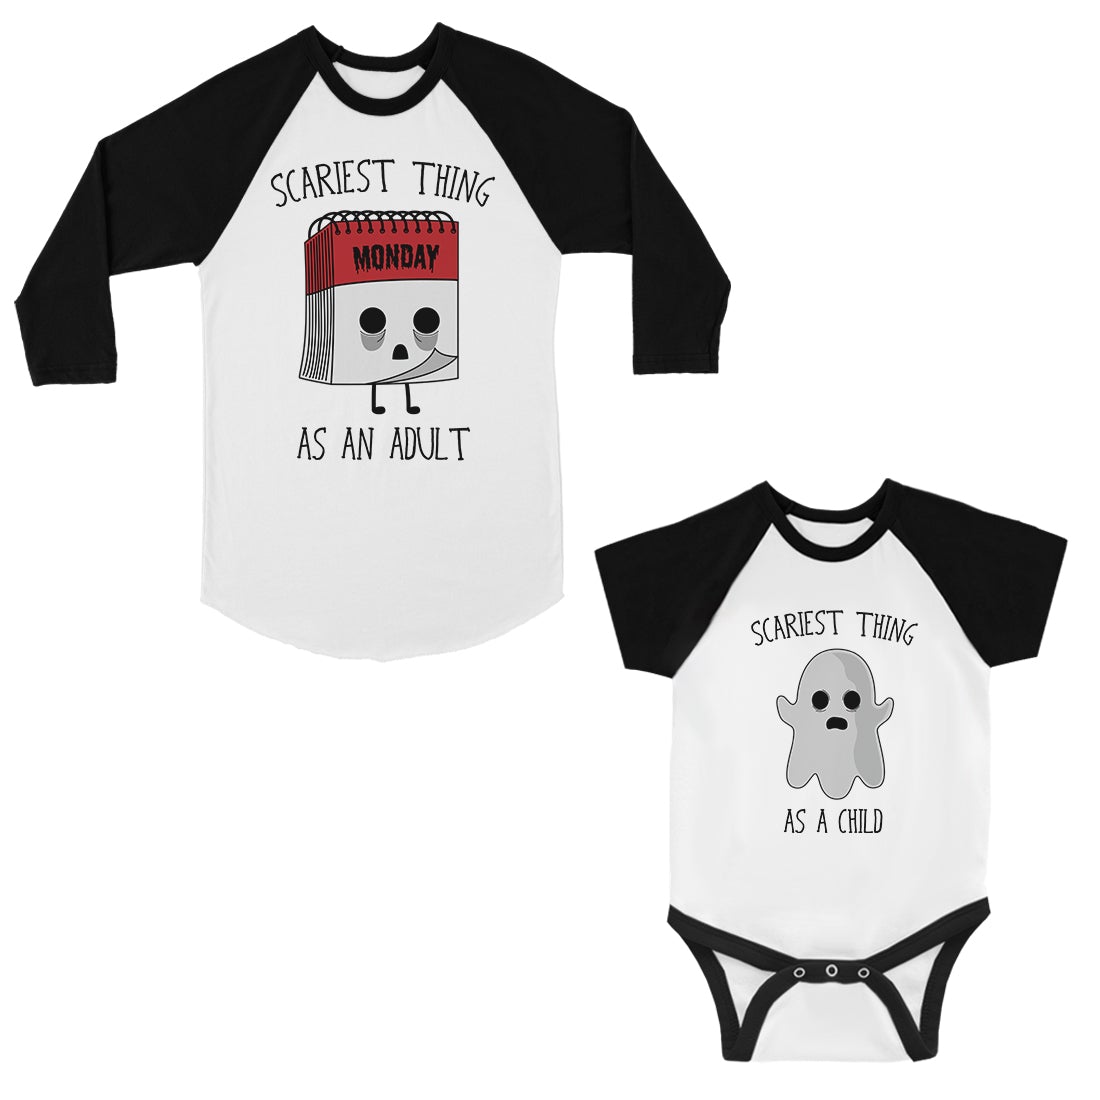 Scariest Thing As an Adult and Child Dad and Baby Boy Matching Outfits Cute Bodysuit Black and White